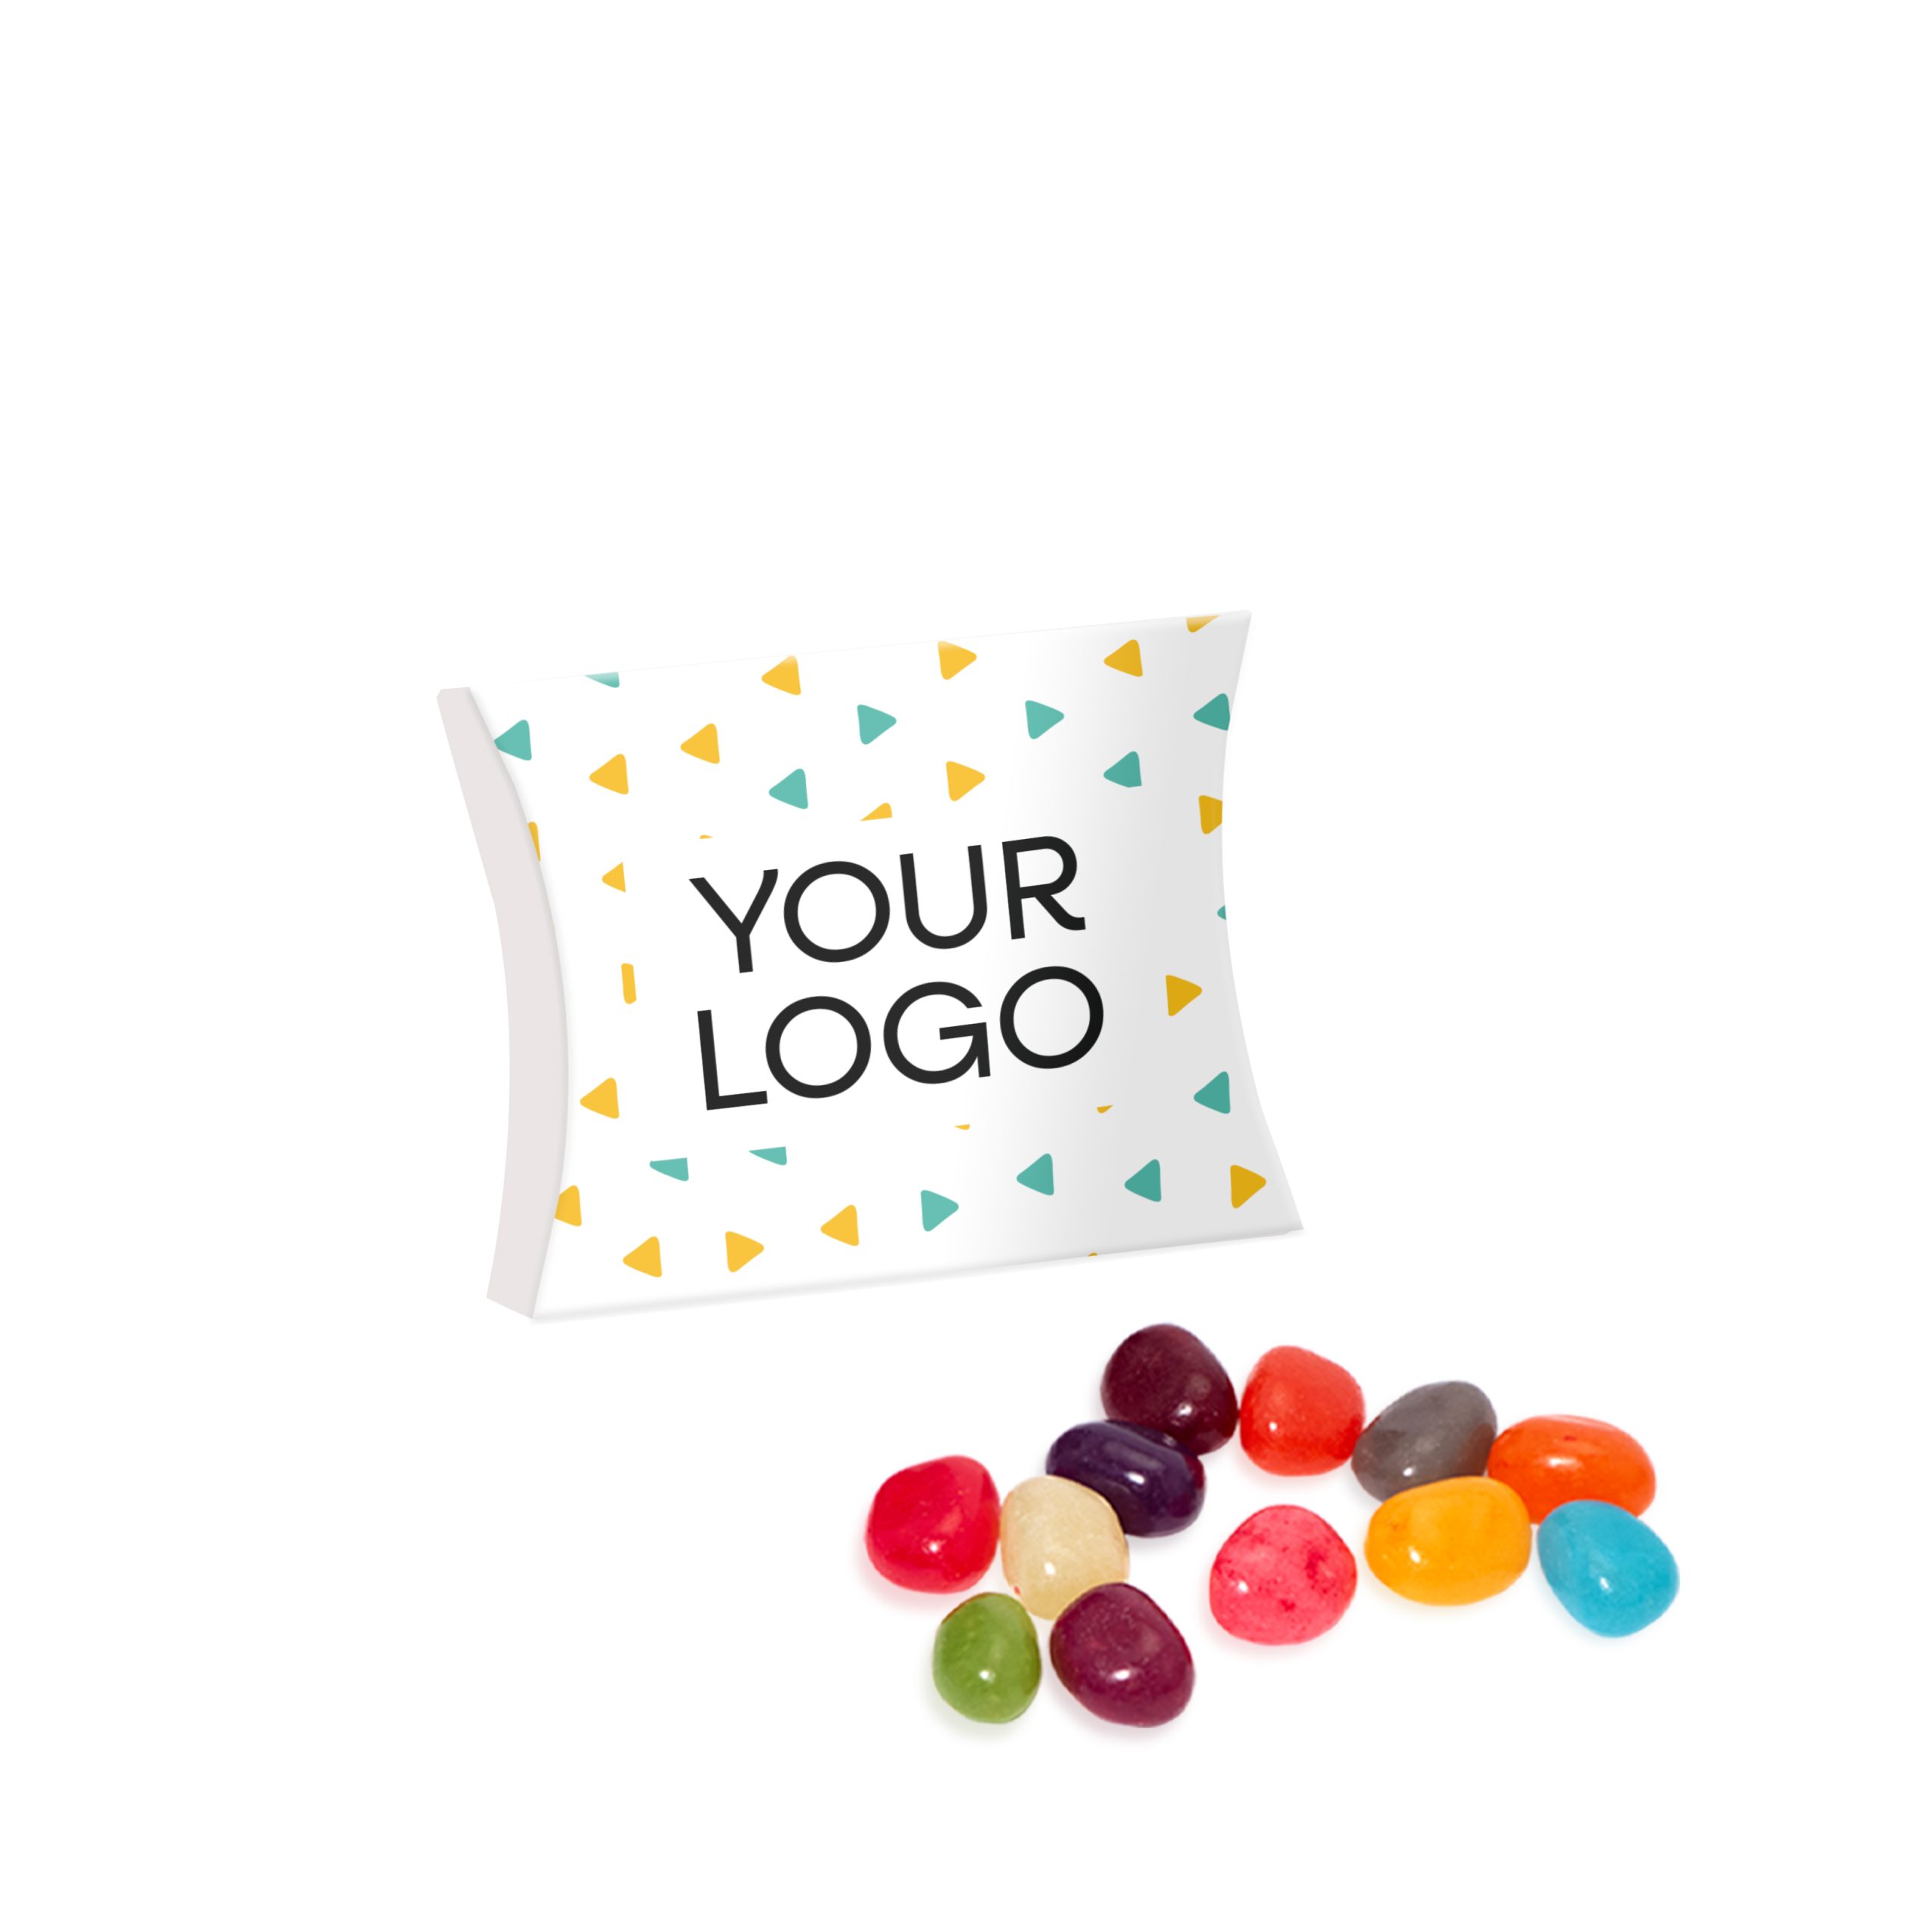 Eco Range - Eco Large Pouch - Jelly Bean Factory®